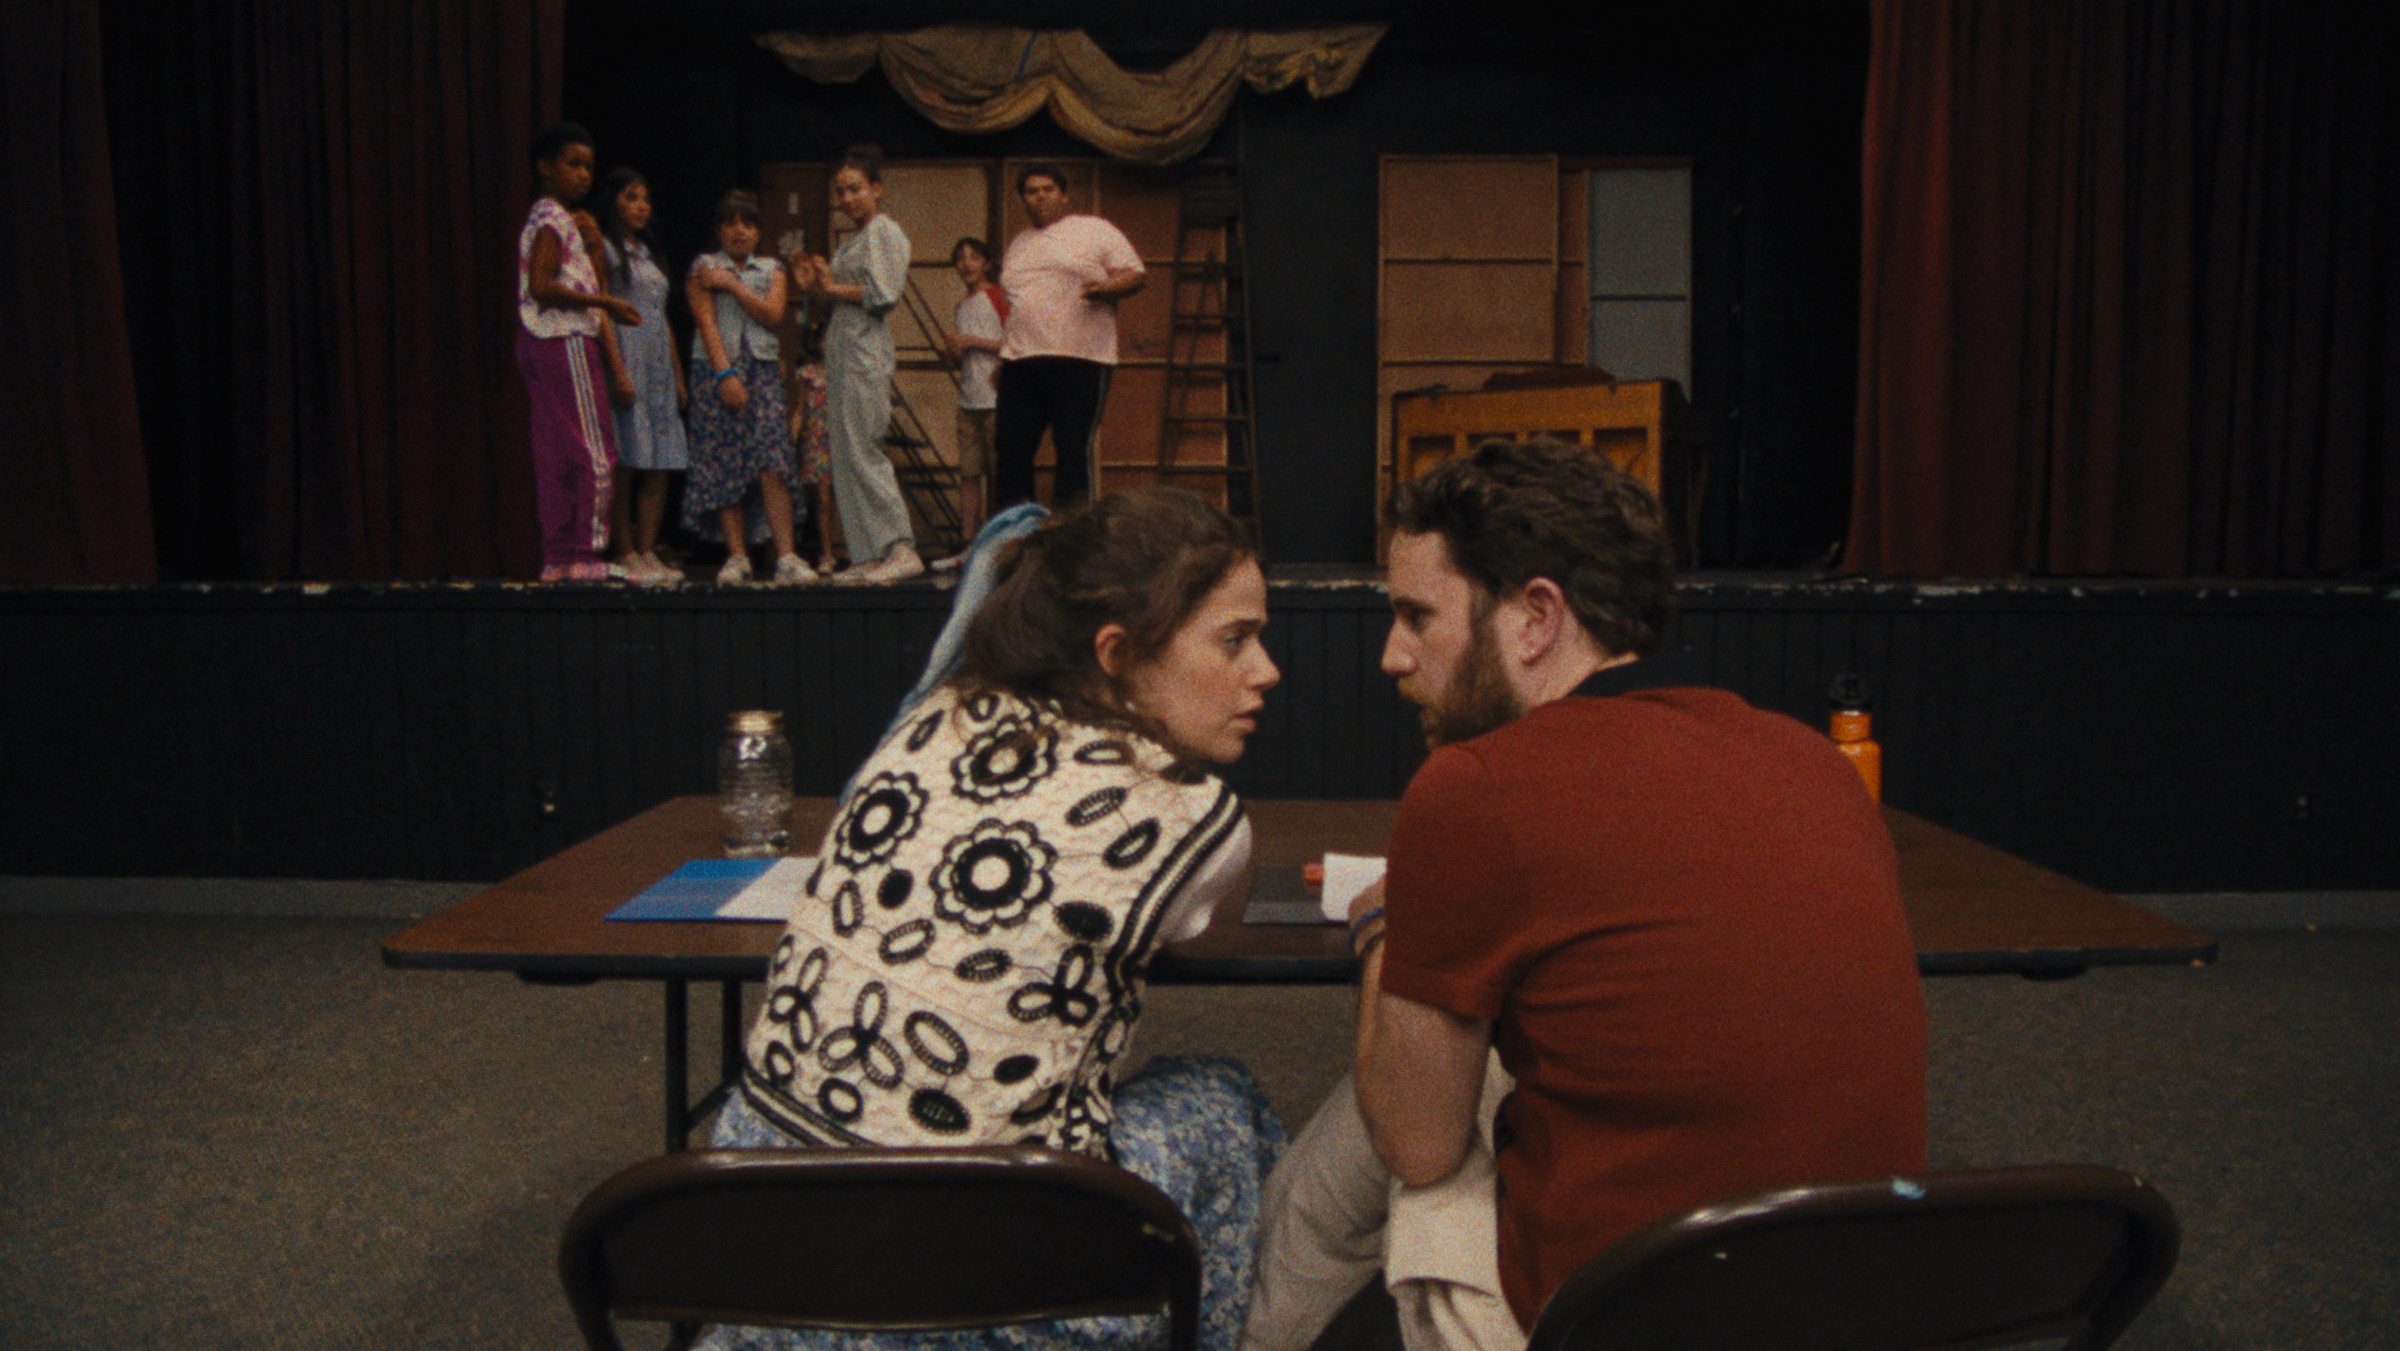 Theater instructors Rebecca-Diane (Molly Gordon) and Amos (Ben Platt) confer as a group of campers looks on. (Courtesy of Searchlight Pictures)